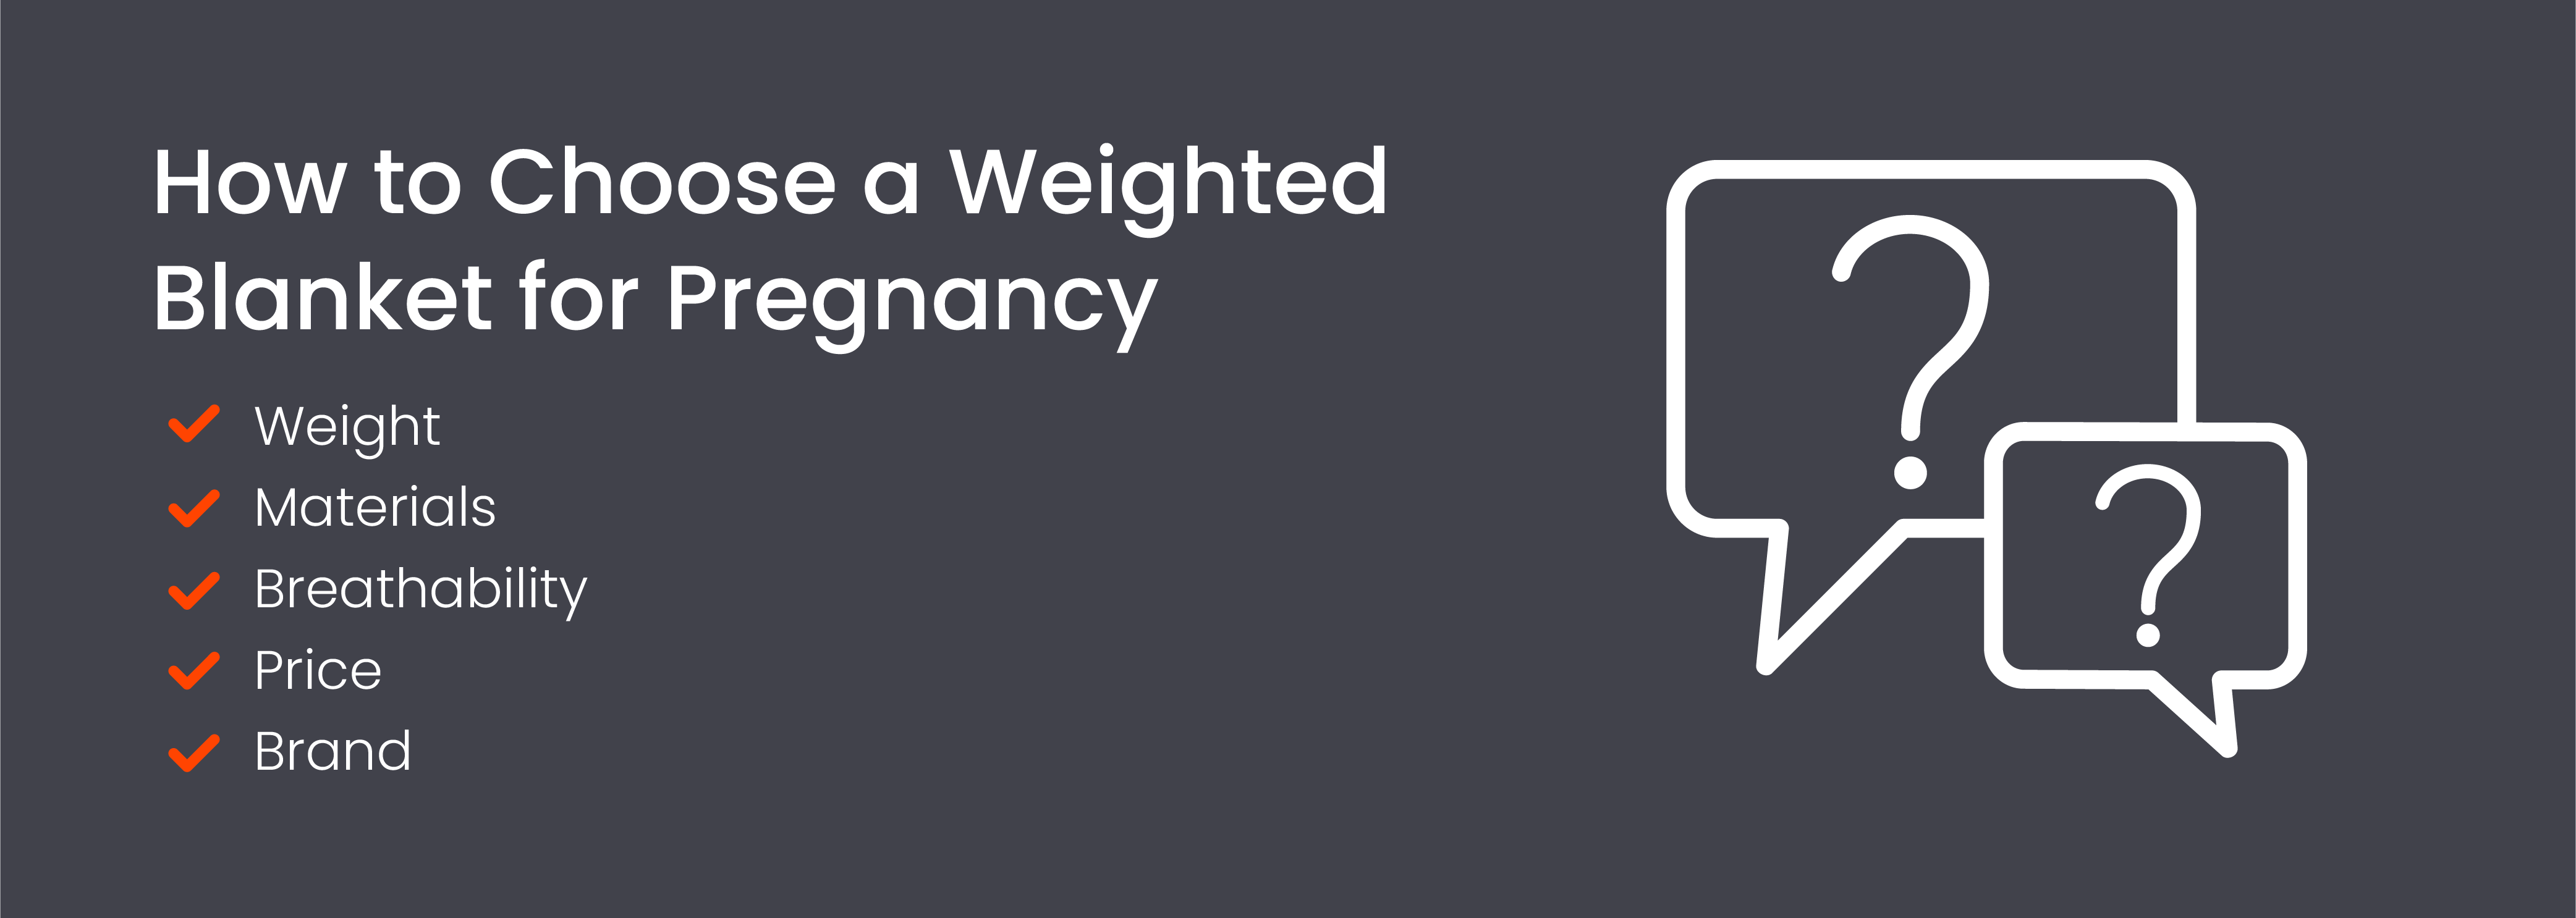 Graphic listing factors to consider when choosing a weighted blanket for pregnancy